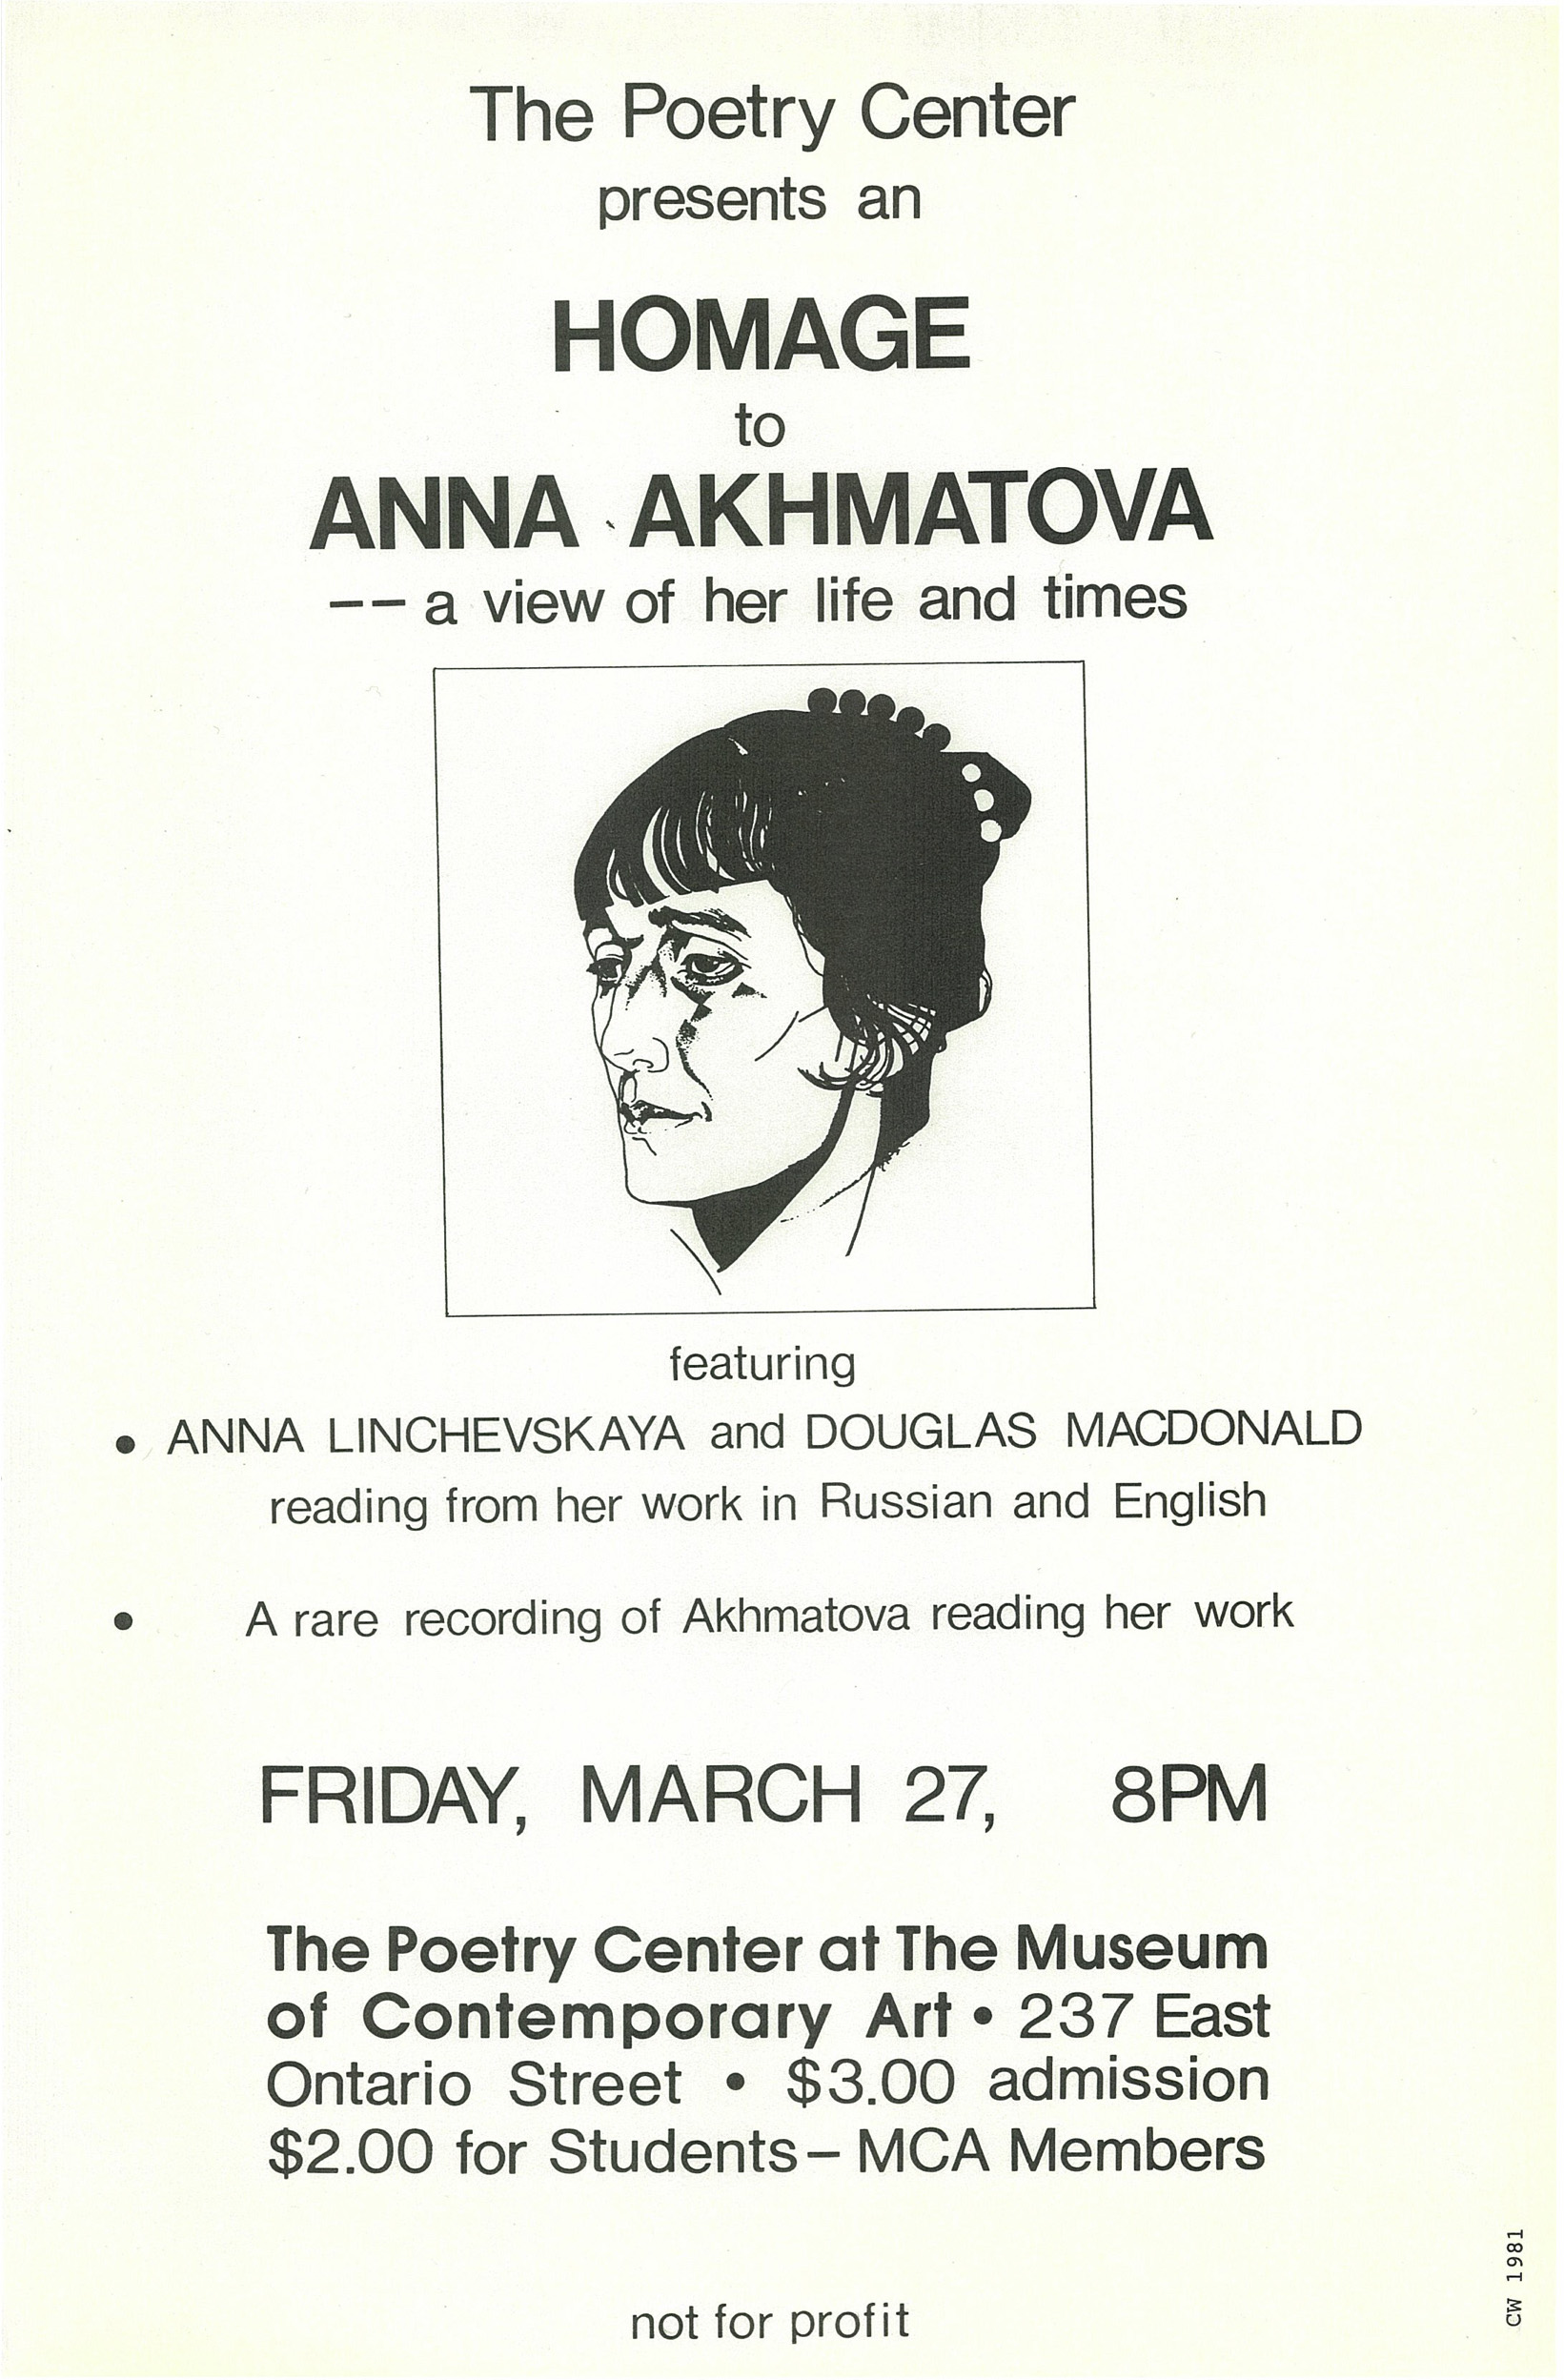 Vintage poster of Homage to Anna Akhmatova featuring Anna Linchevskaya and Douglas MacDonald reading at the Poetry Center of Chicago.